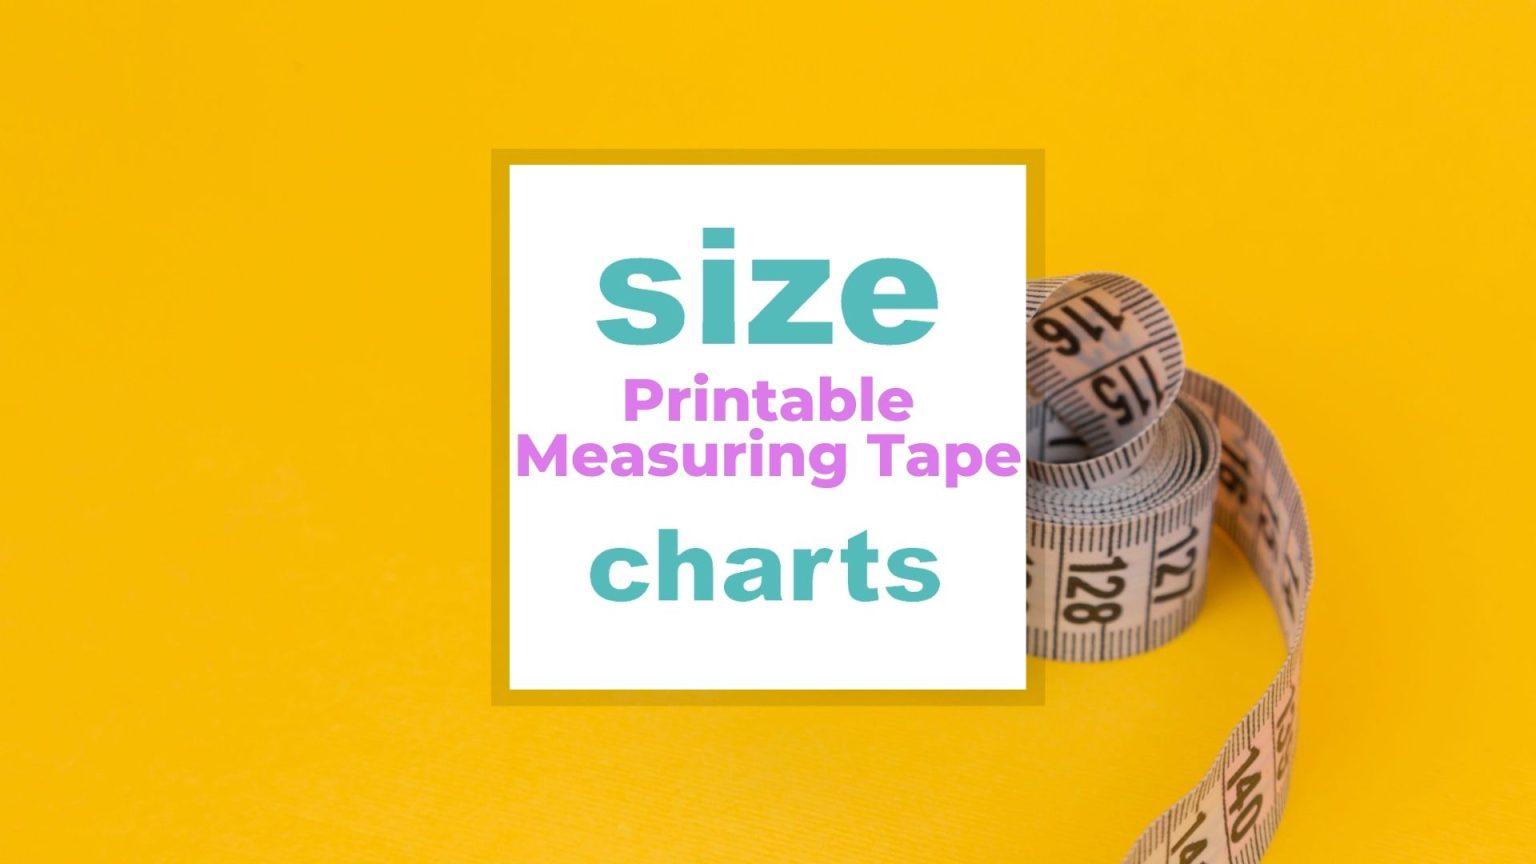 Printable Measuring Tape: Do It Yourself